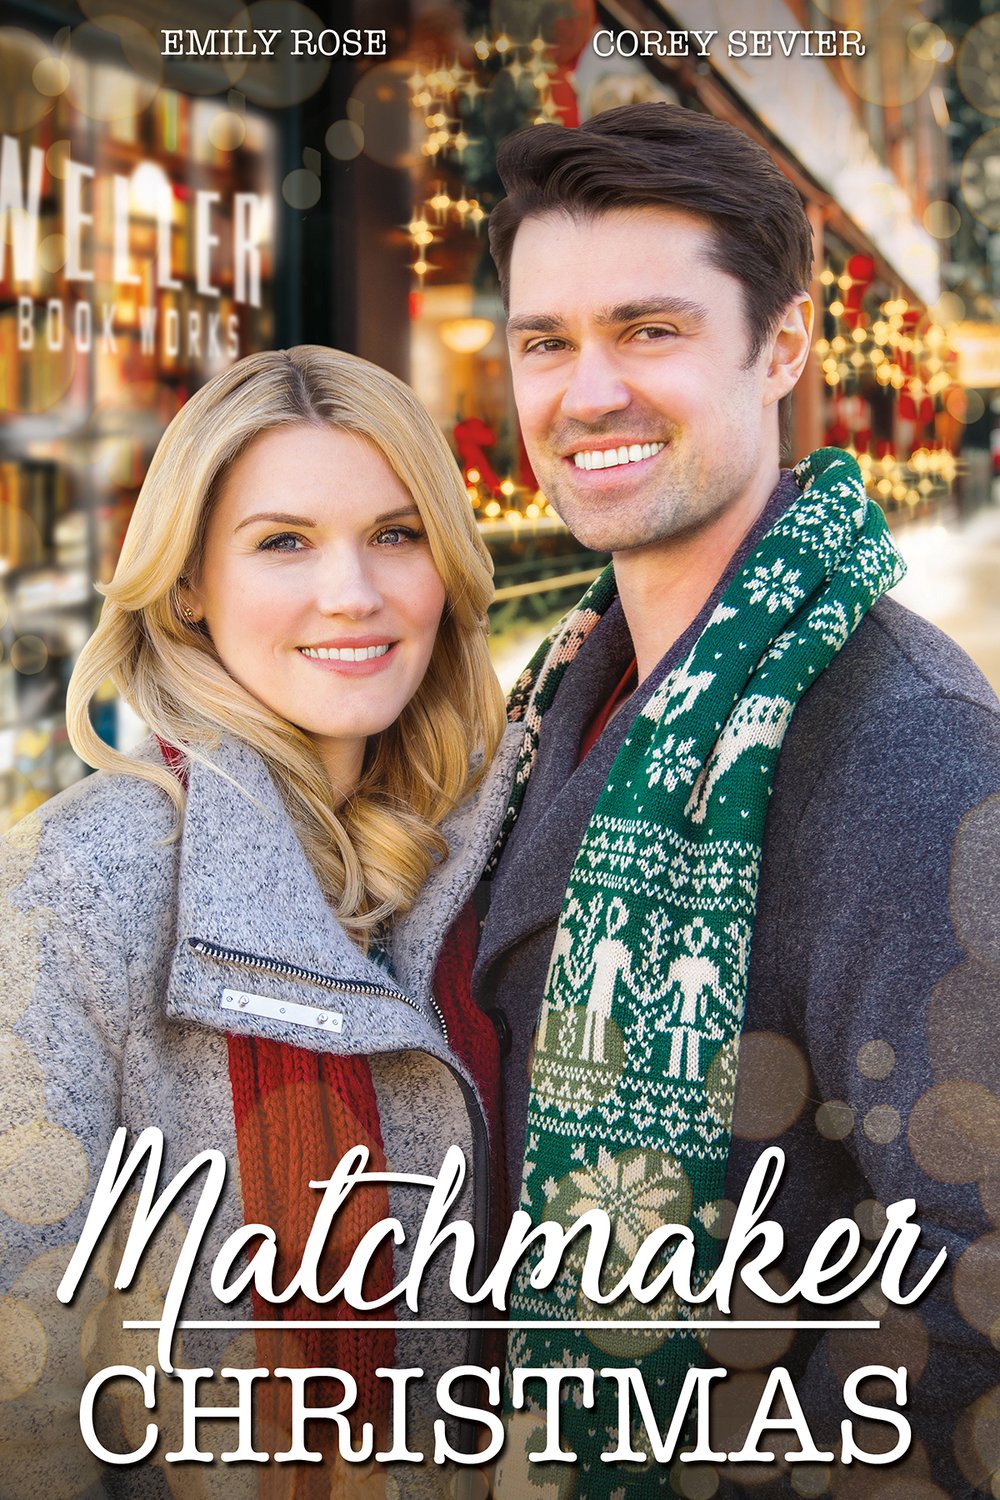 Poster of the movie Matchmaker Christmas